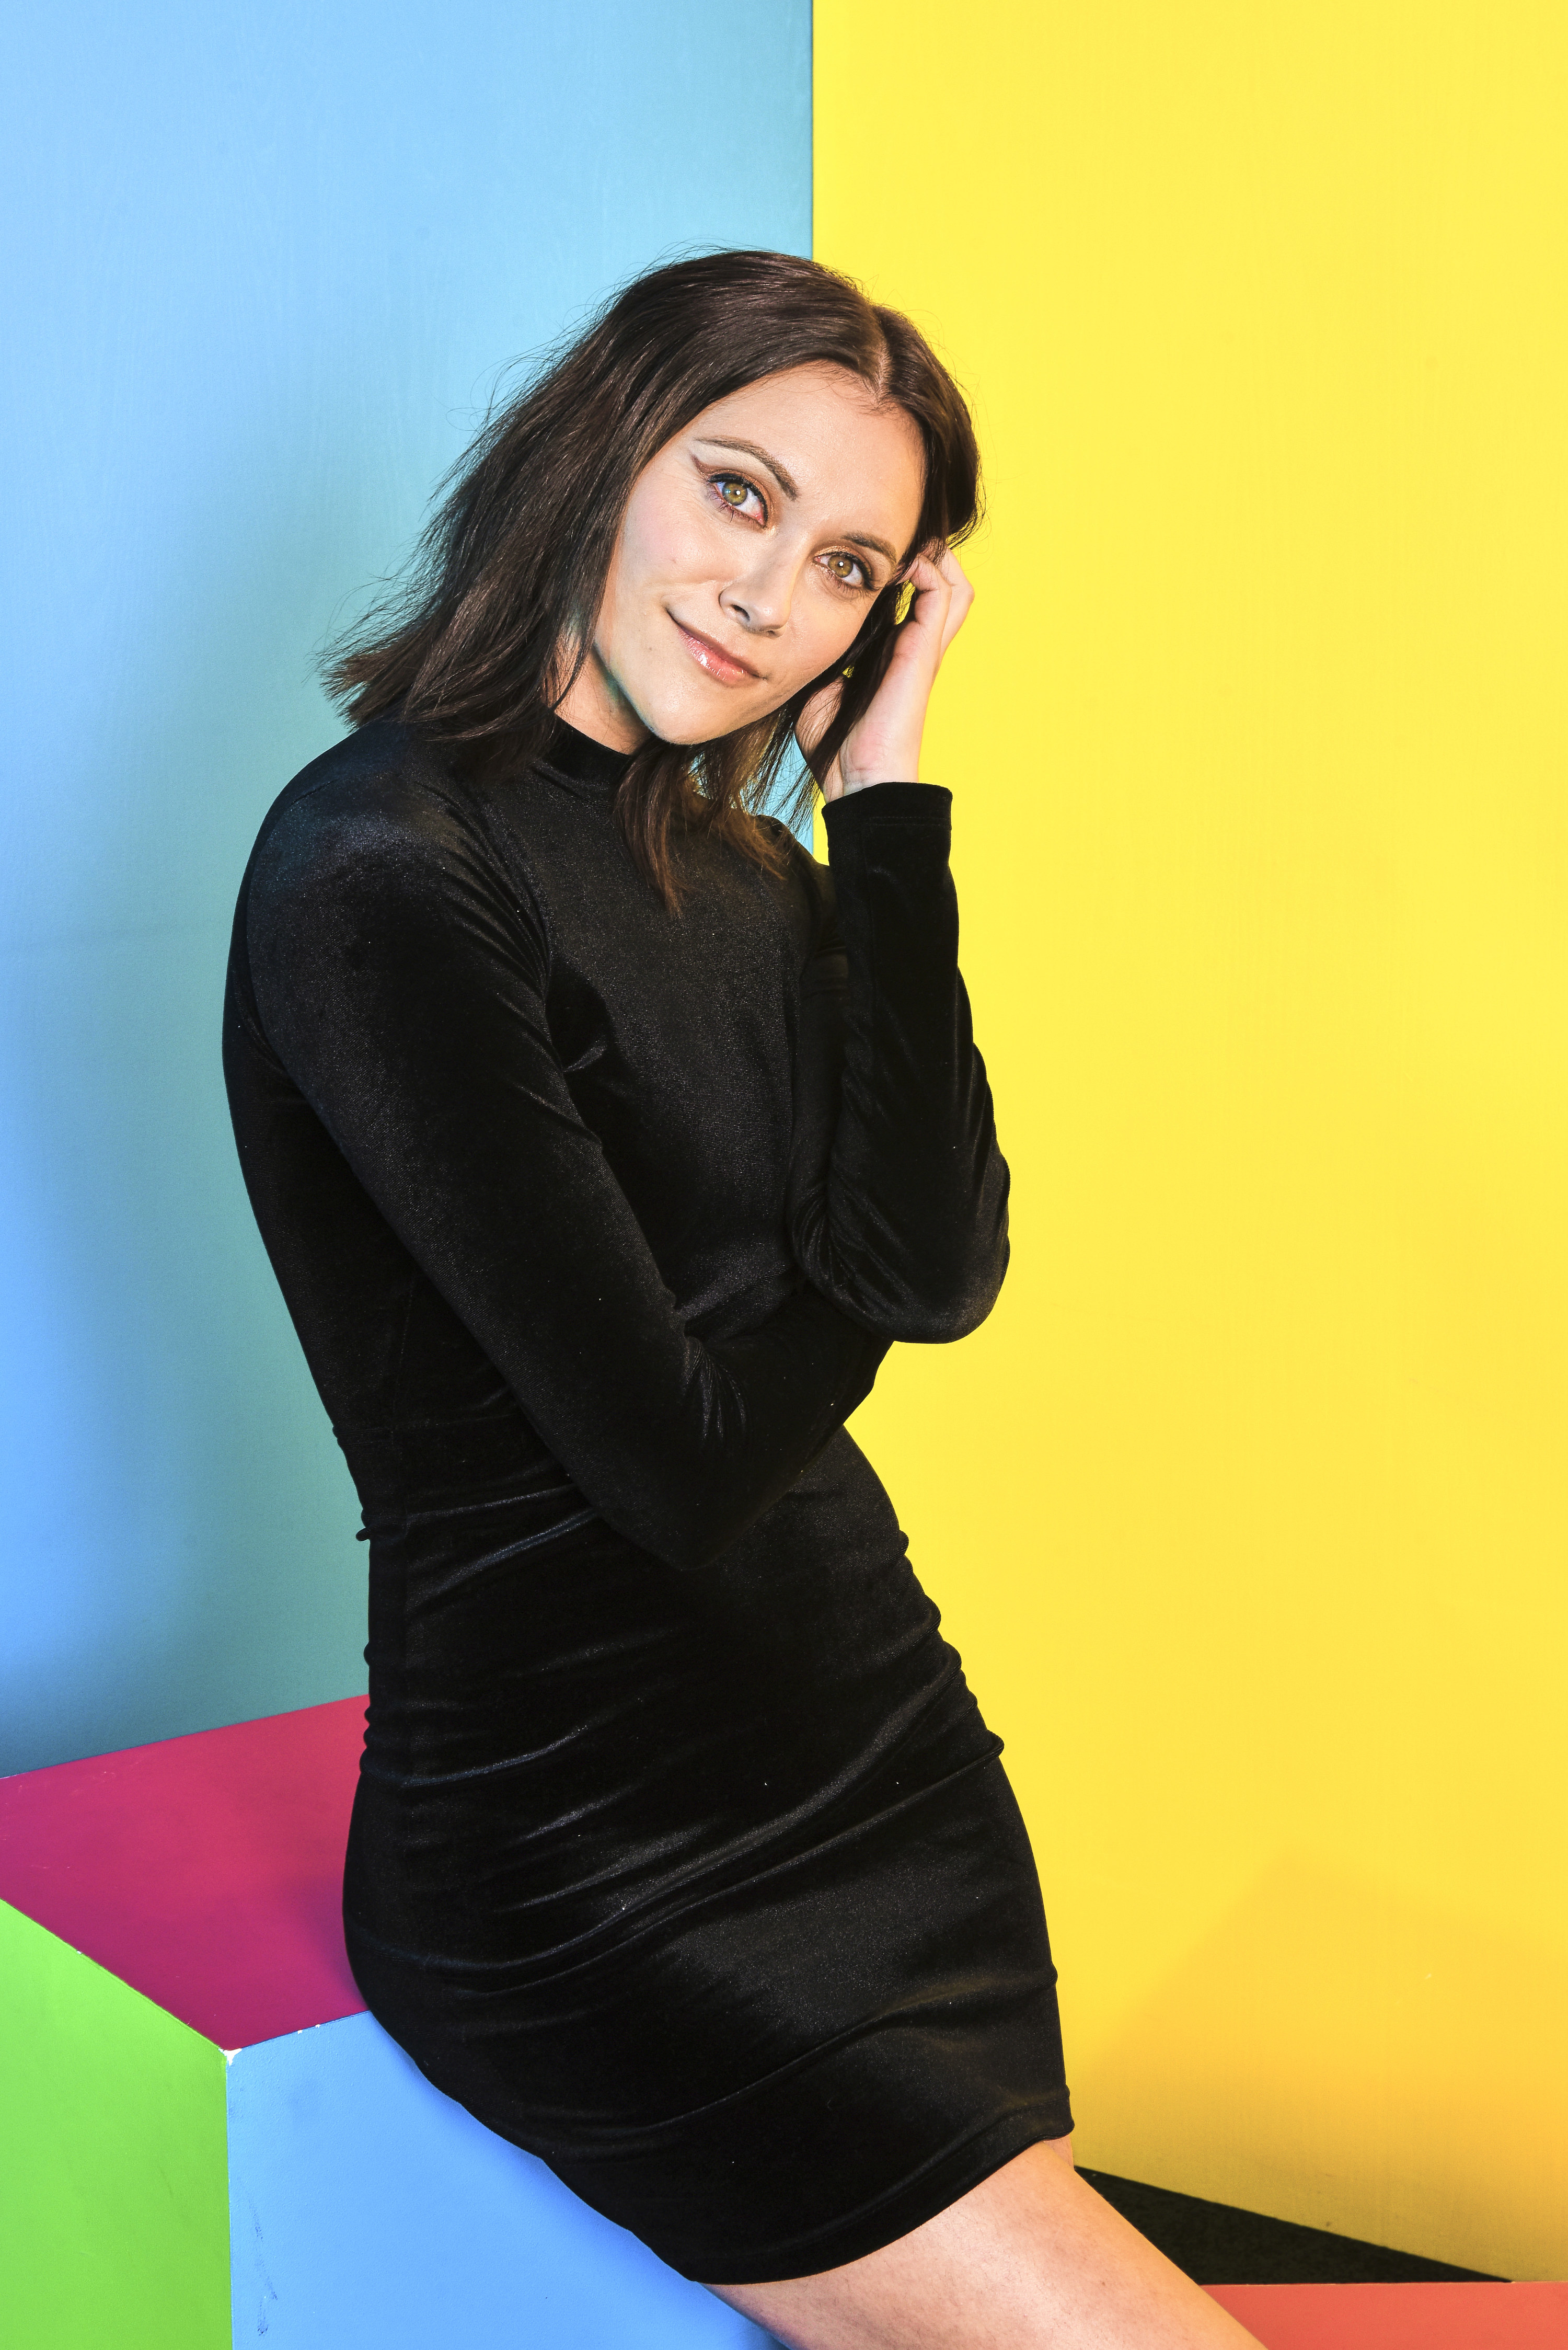 Alyson Stoner visits the #IMDboat official portrait studio at San Diego Comic-Con